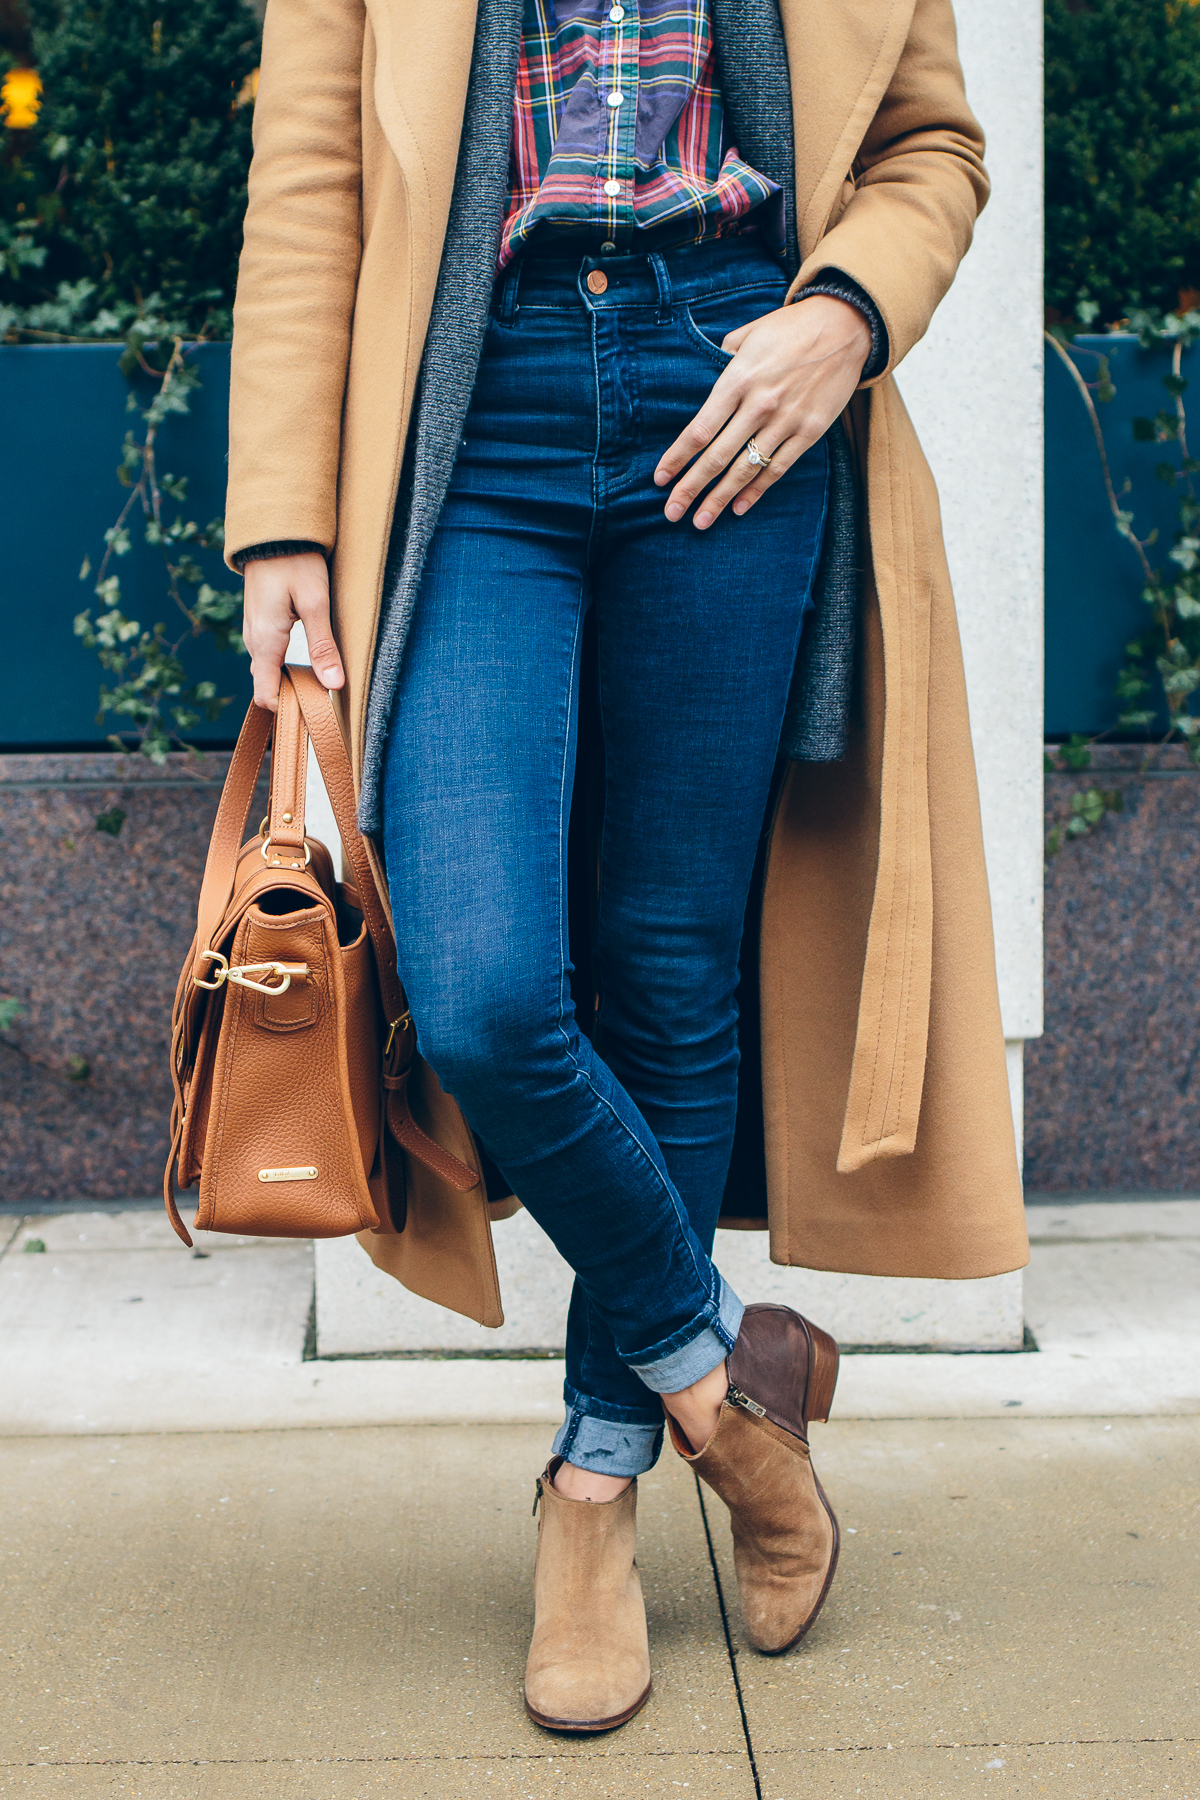 plaid shirt and leather ankle boots, winter outfit, layers — via @TheFoxandShe